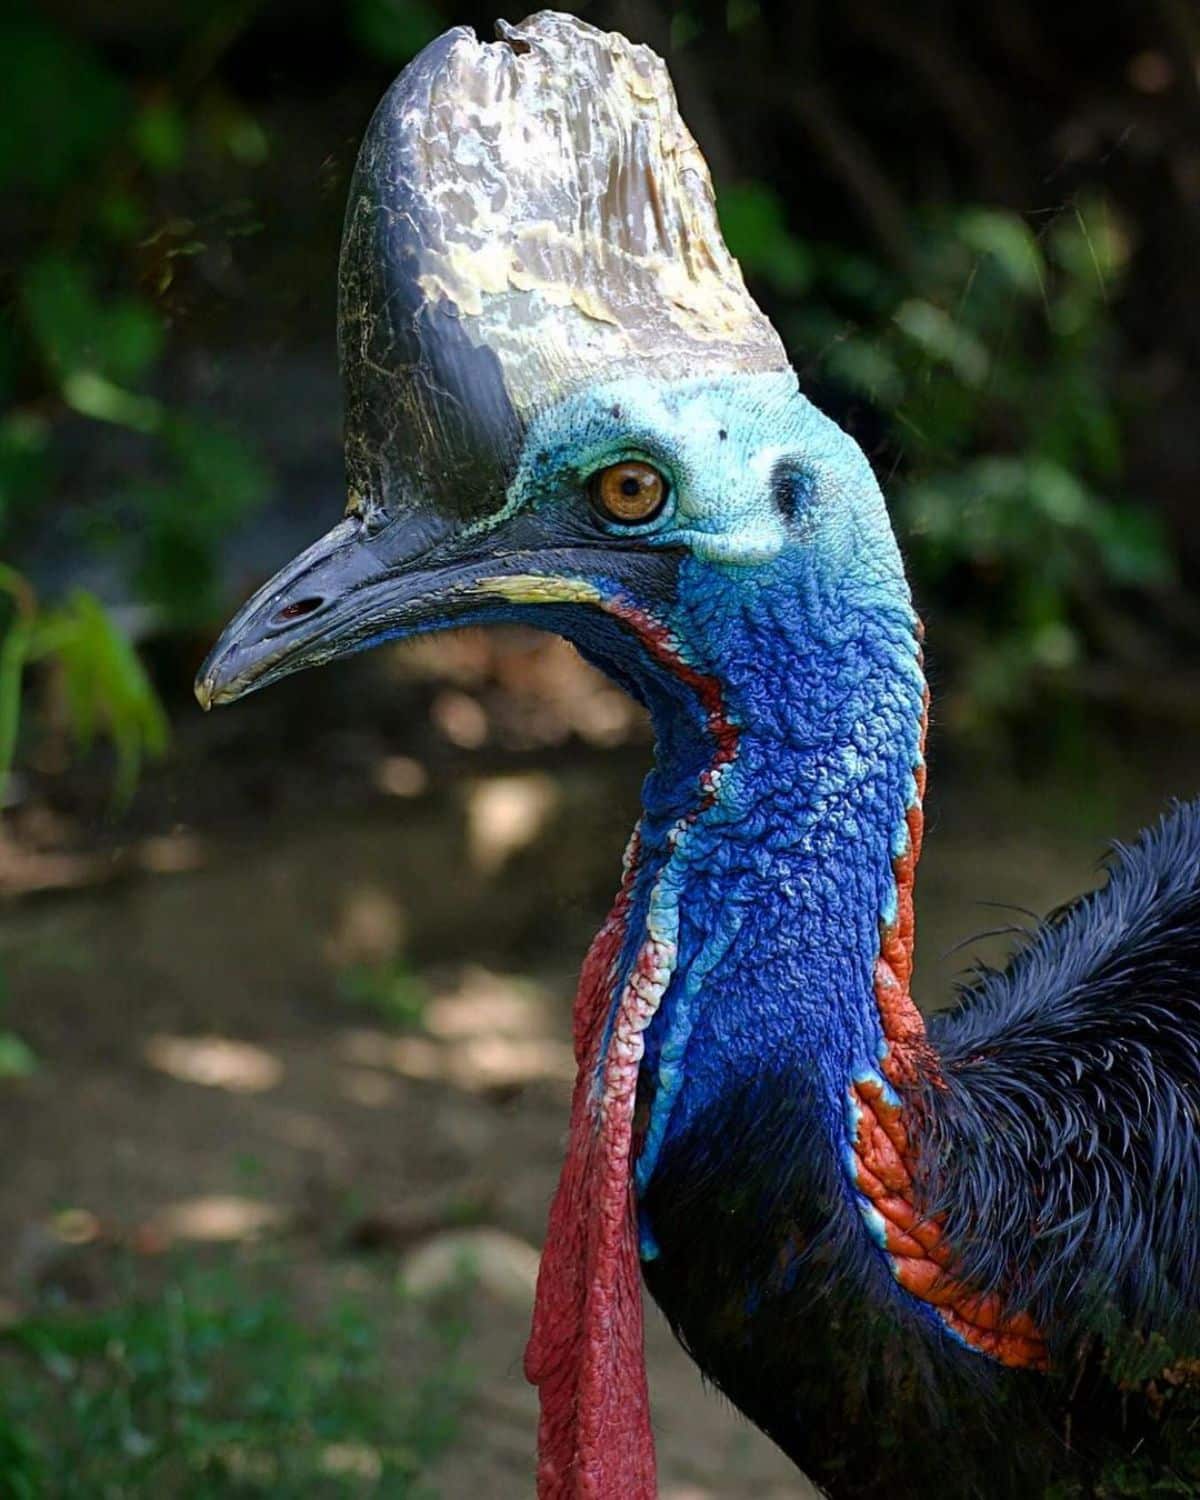 A close-up of a beautiful Southern Cassowary.